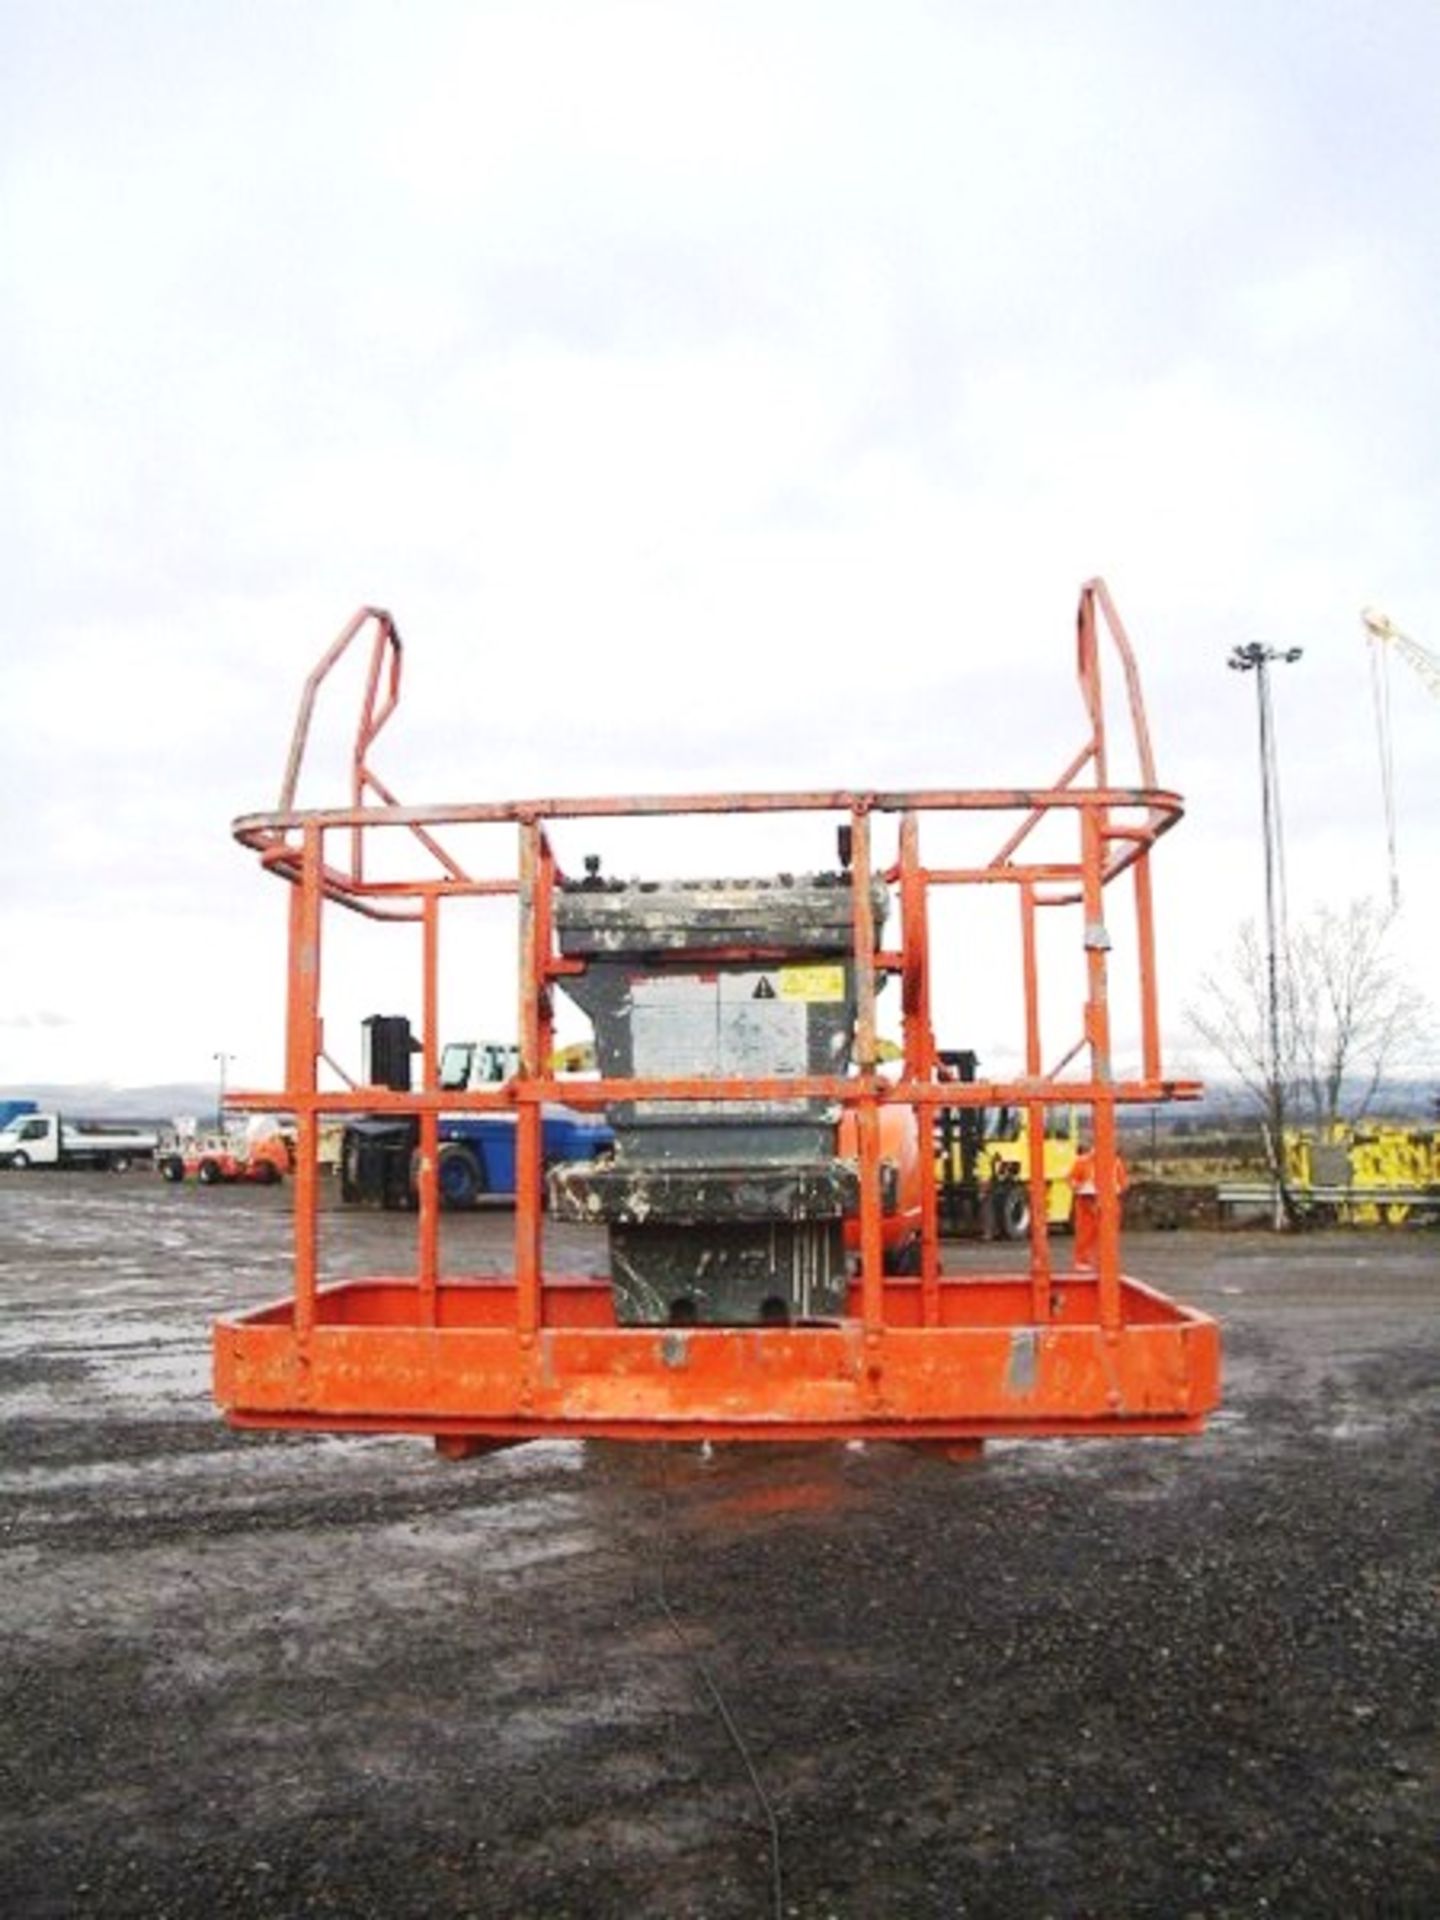 1999 JLG 800AJ, S/N - 1871, 5672hrs (verified), new CAT track hoses & wiring loom on boom by JLG 3 y - Image 10 of 13